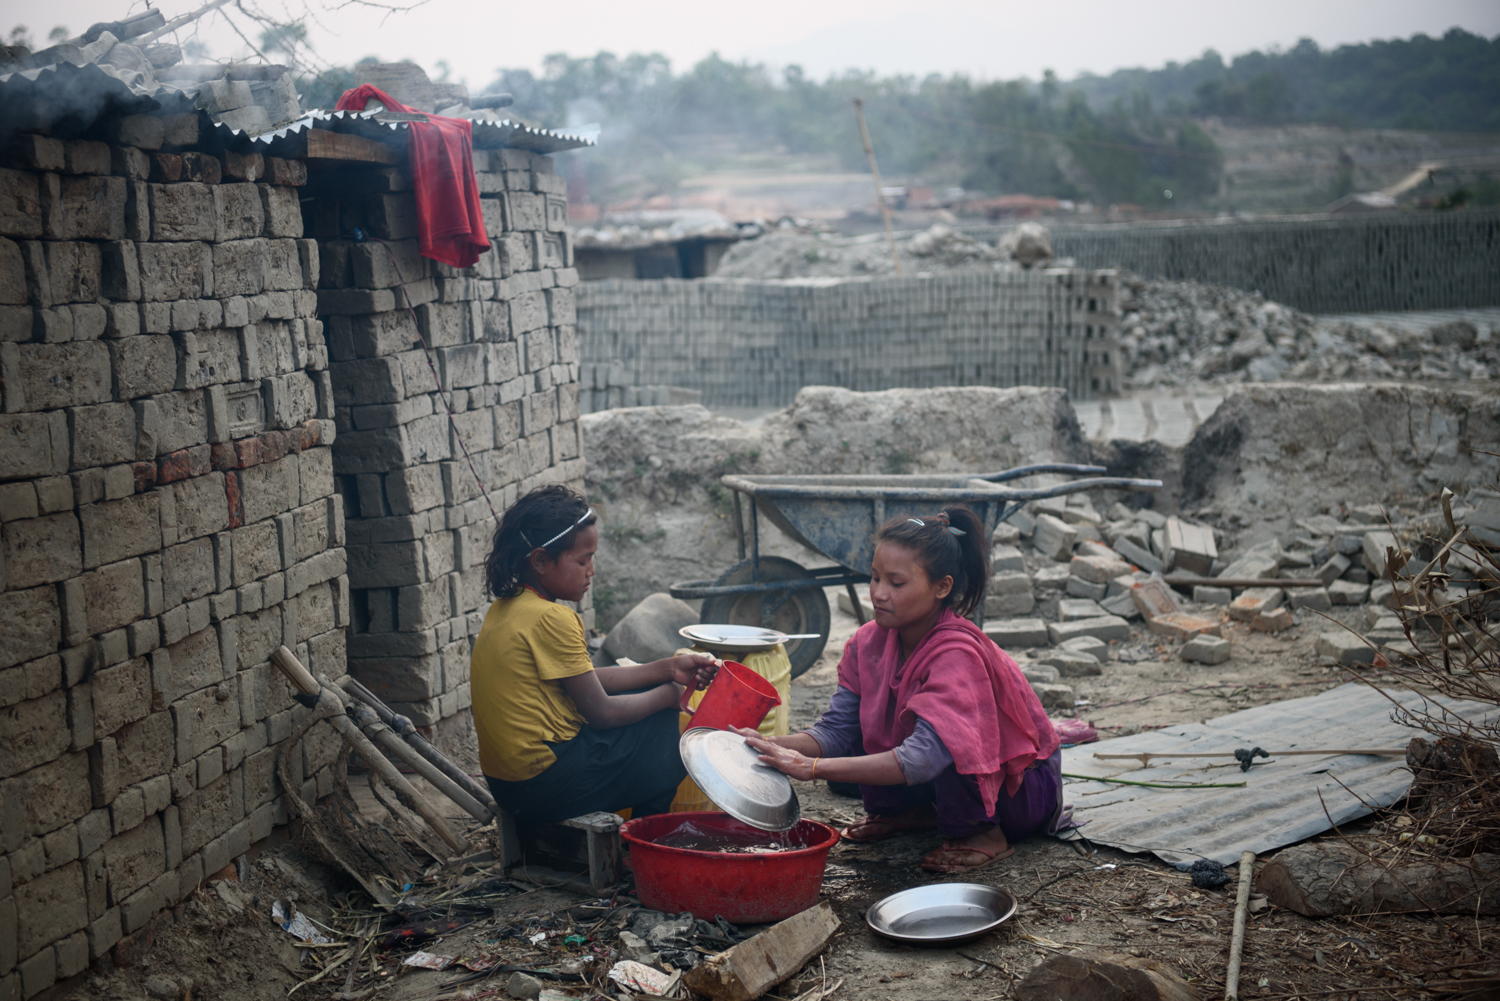  Selina Tamang (9) helps her sister Bipana Tamang (11) to wash utensils and prepare for dinner at their home in Badikhel, Lalitpur, Nepal. Bipana goes to school but Selina dropped out of school because of excessive bullying. Both the girls work in th